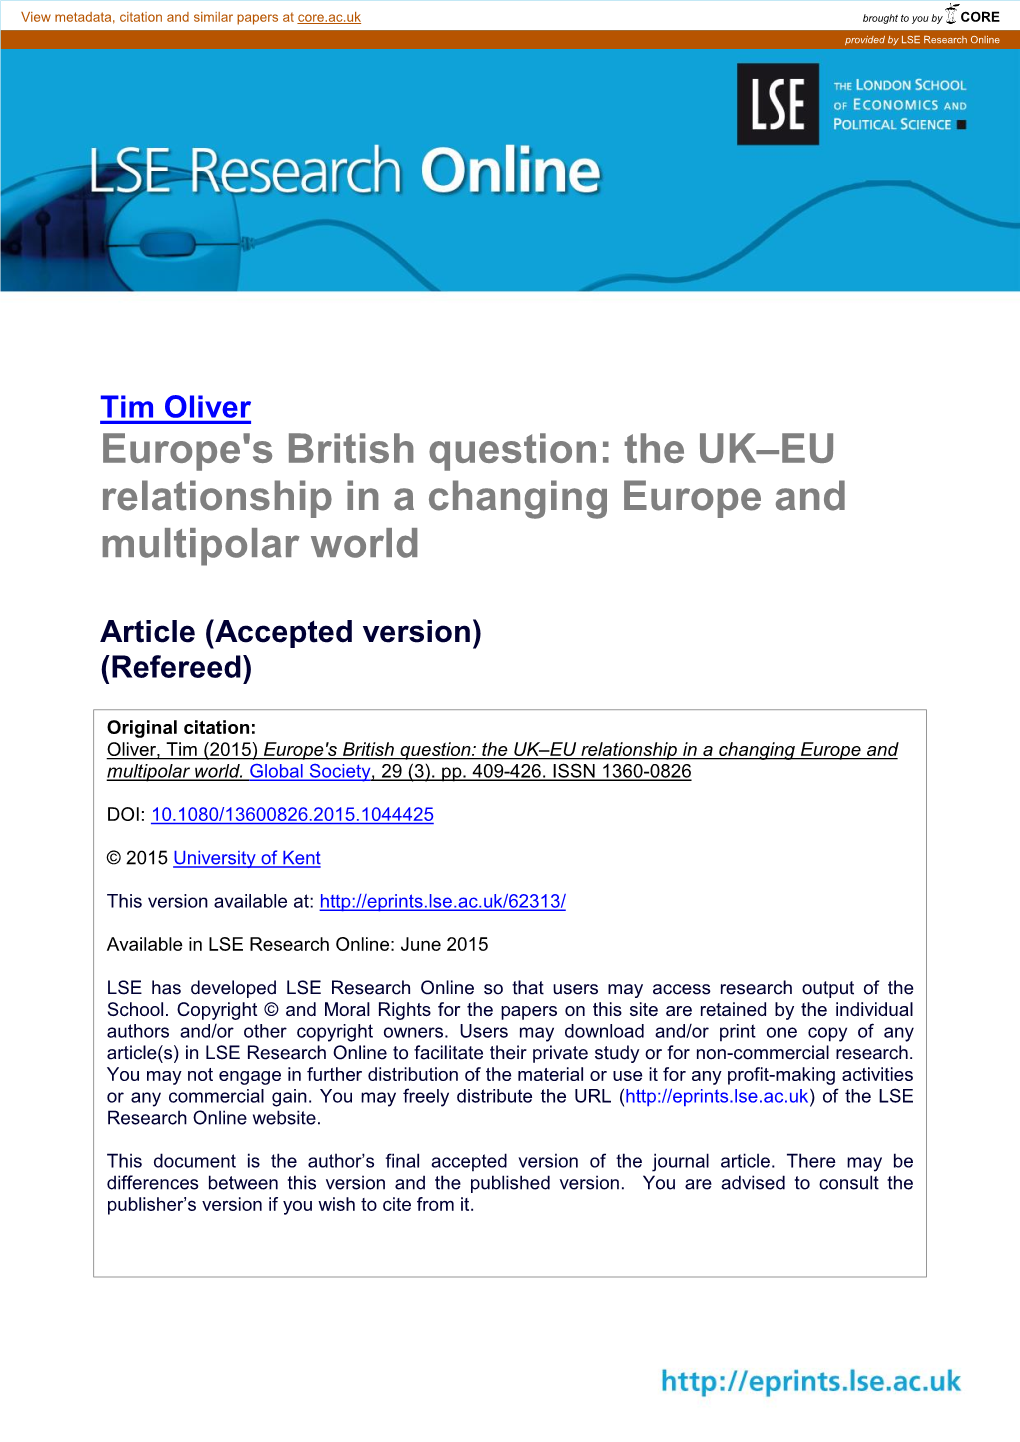 The UK–EU Relationship in a Changing Europe and Multipolar World